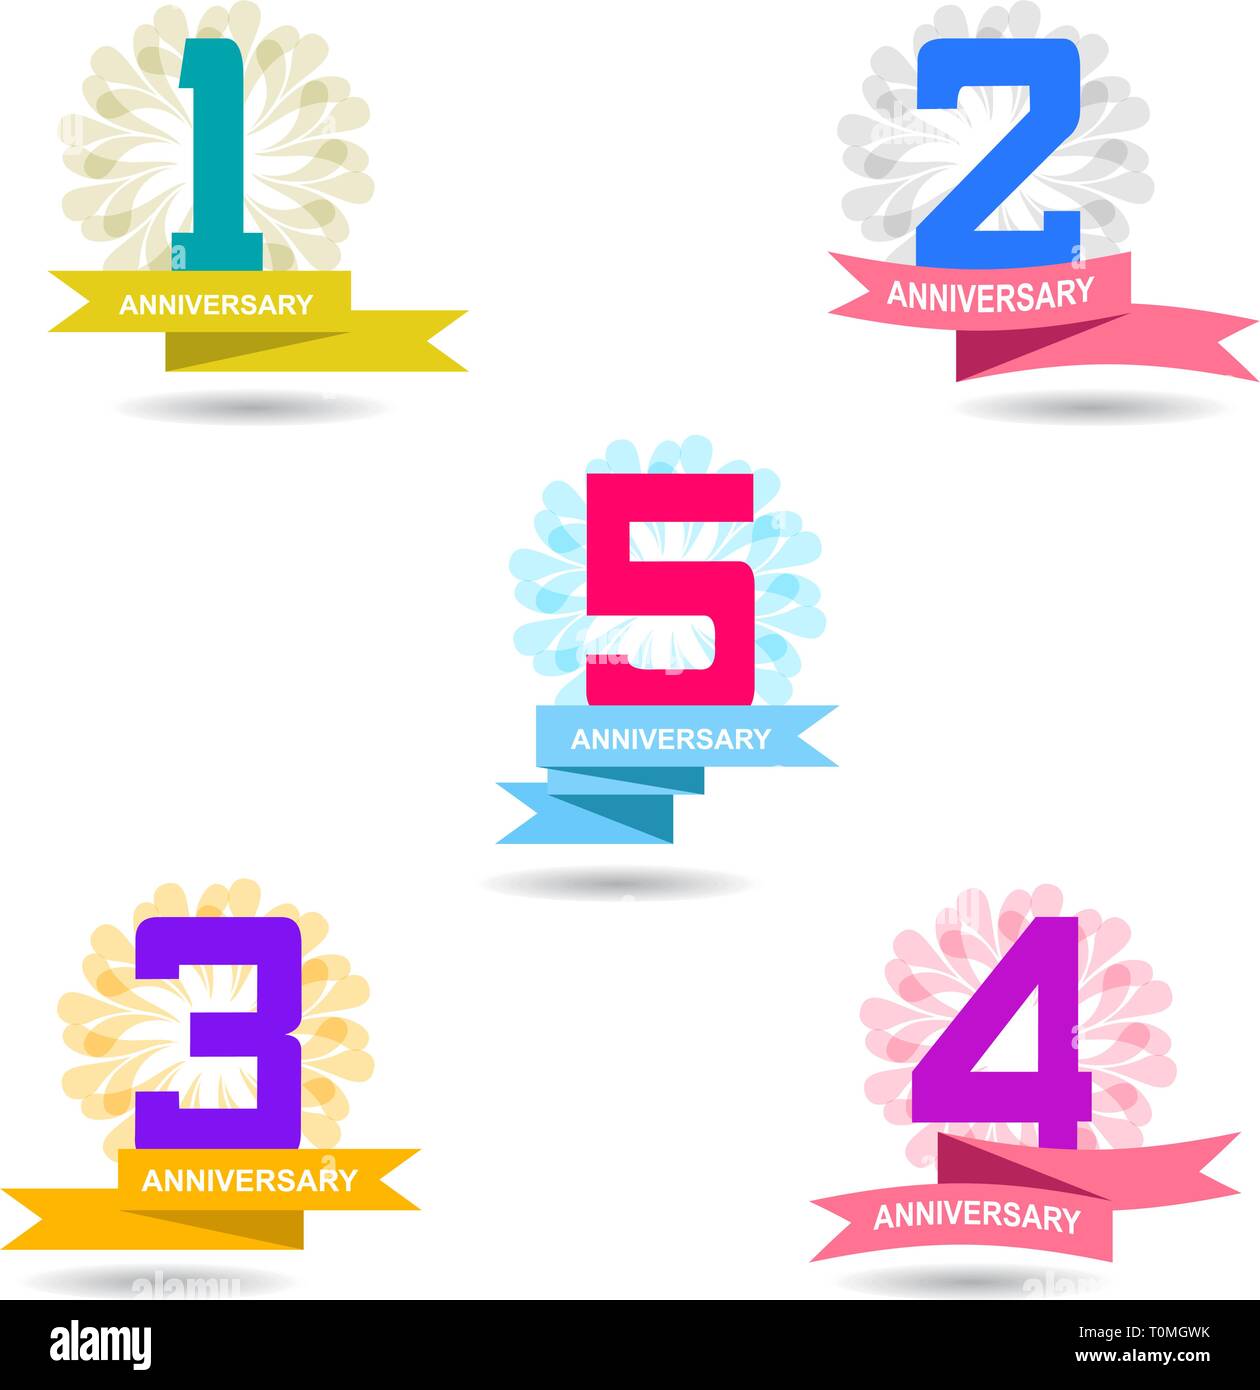 Anniversary collection set number 1-5 Stock Vector